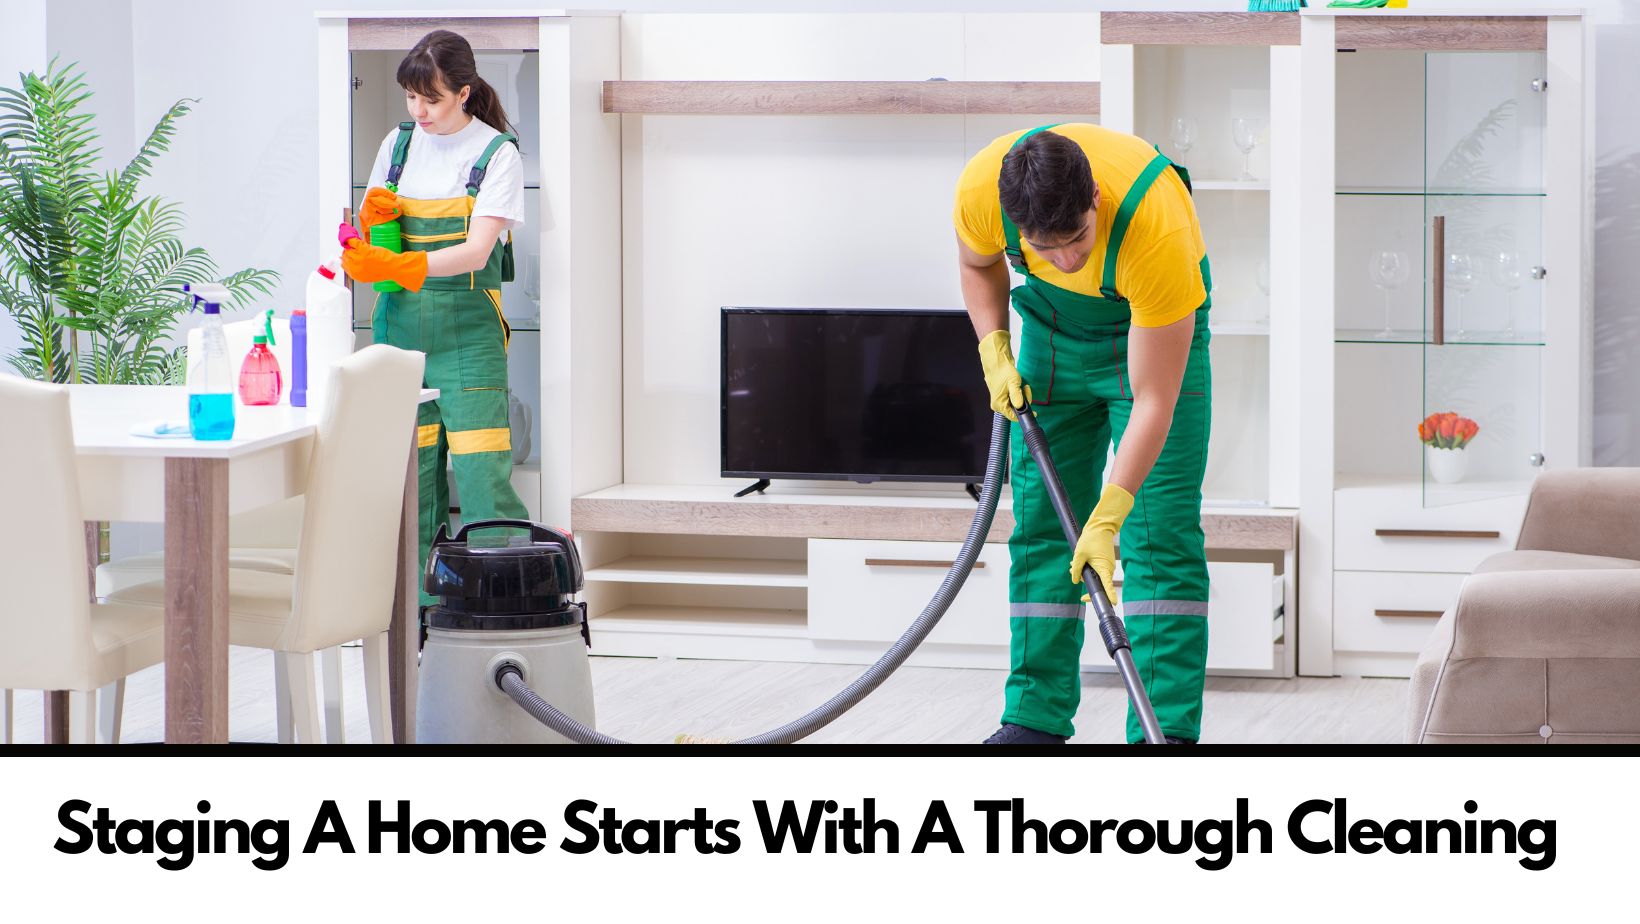 Home Staging starts with a deep cleaning